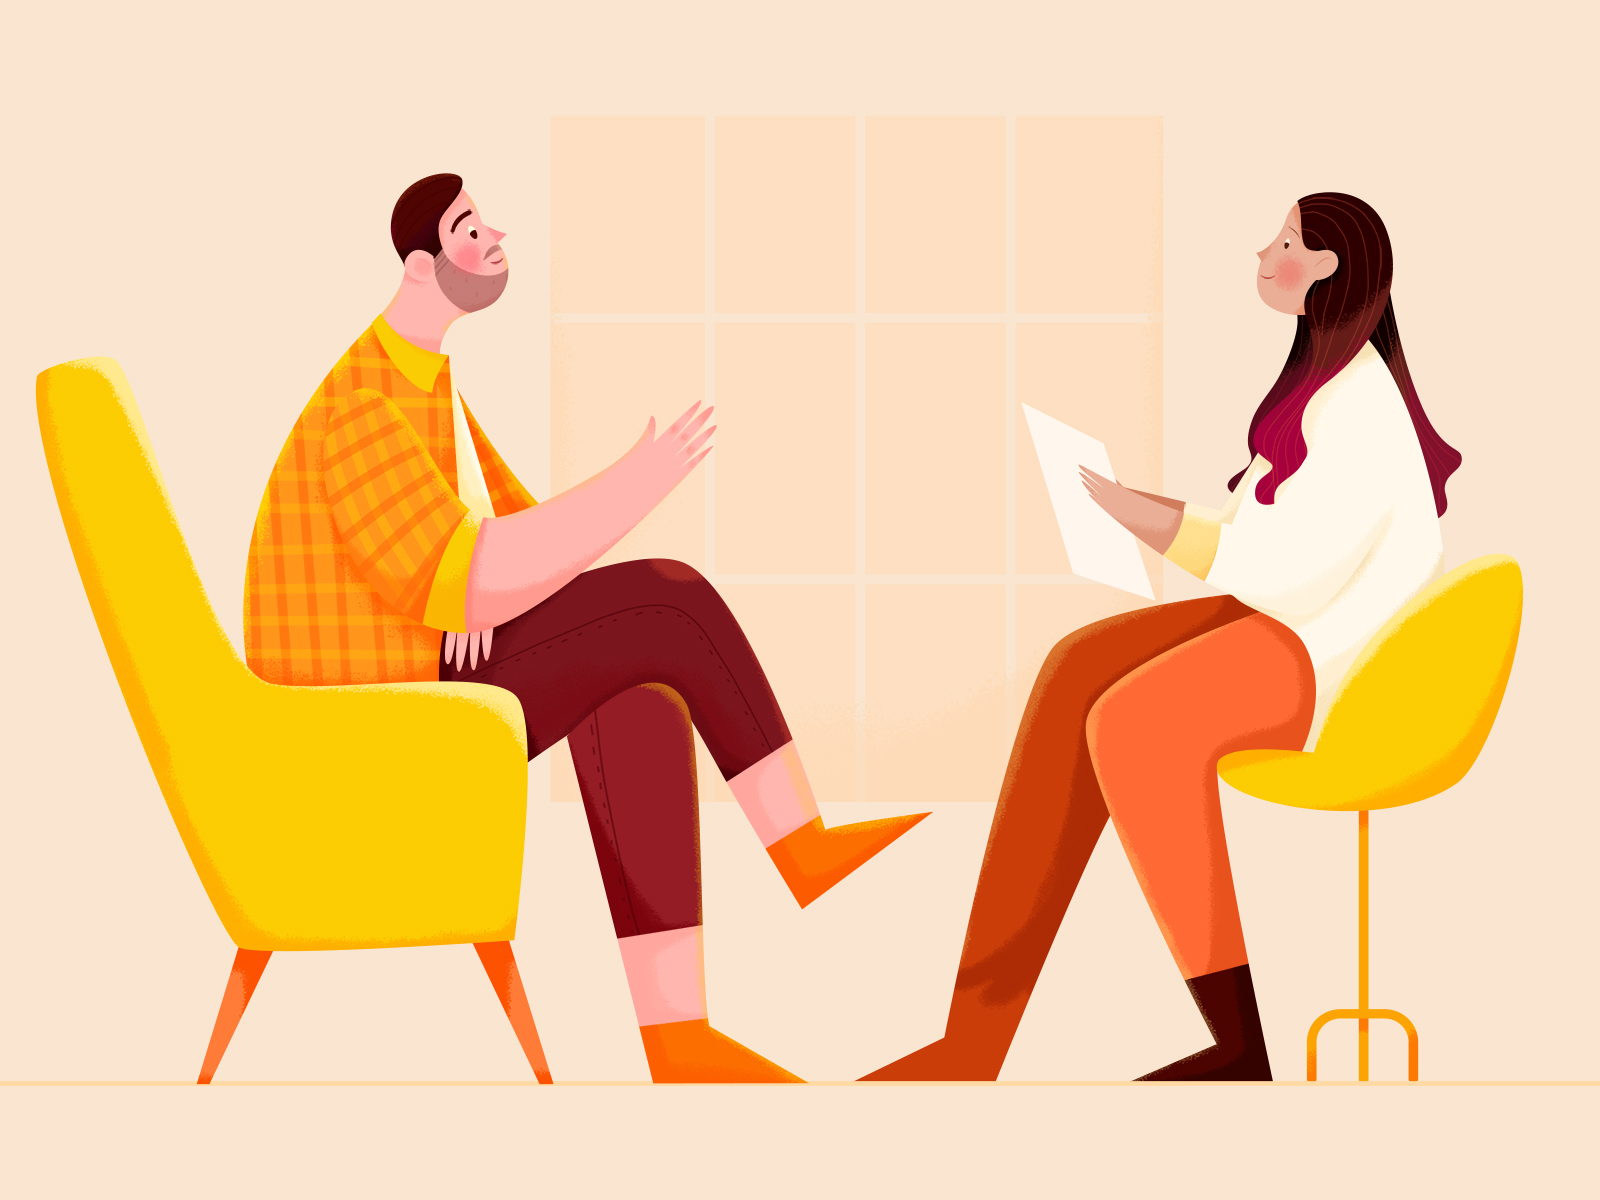 Ask a Recruiter affinity designer ask boy business character chat girl illustration man noise office people recruiter report talk team texture uran woman work